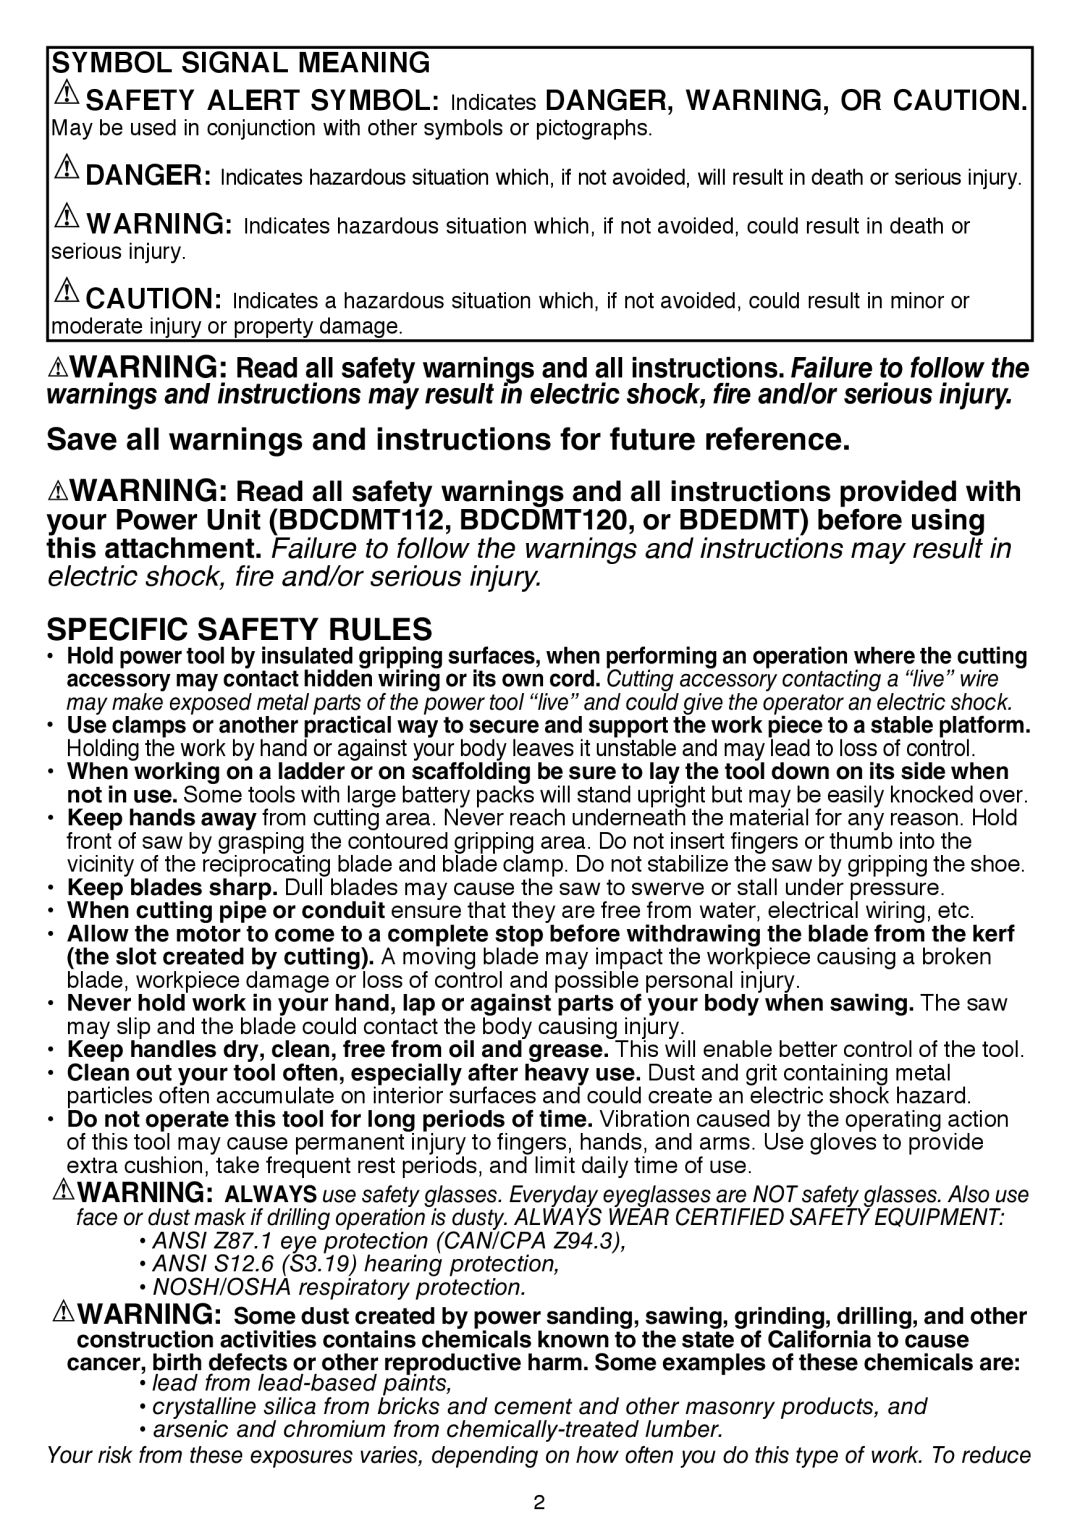 Black & Decker BDCMTJS instruction manual Specific Safety Rules, Symbol Signal Meaning 